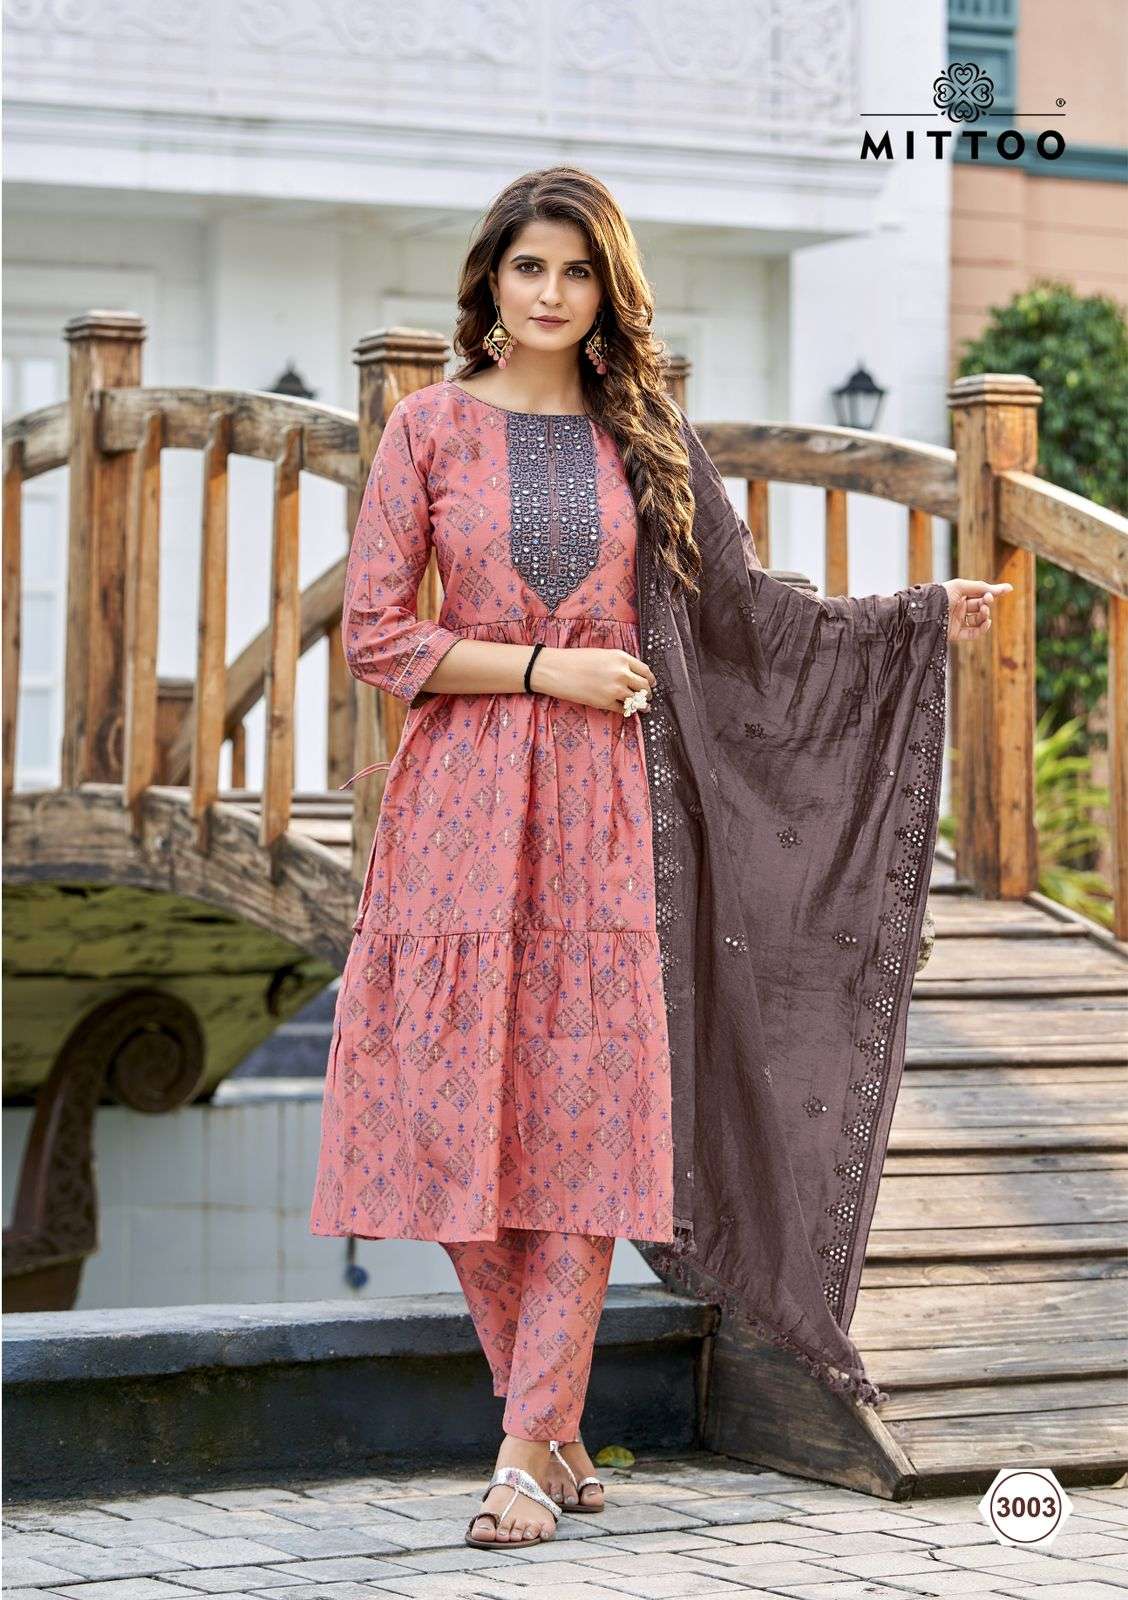 Parampara By Mittoo 3001 To 3004 Series Indian Traditional Wear Collection Beautiful Stylish Fancy Colorful Party Wear & Wear Viscose Chanderi Dress At Wholesale Price